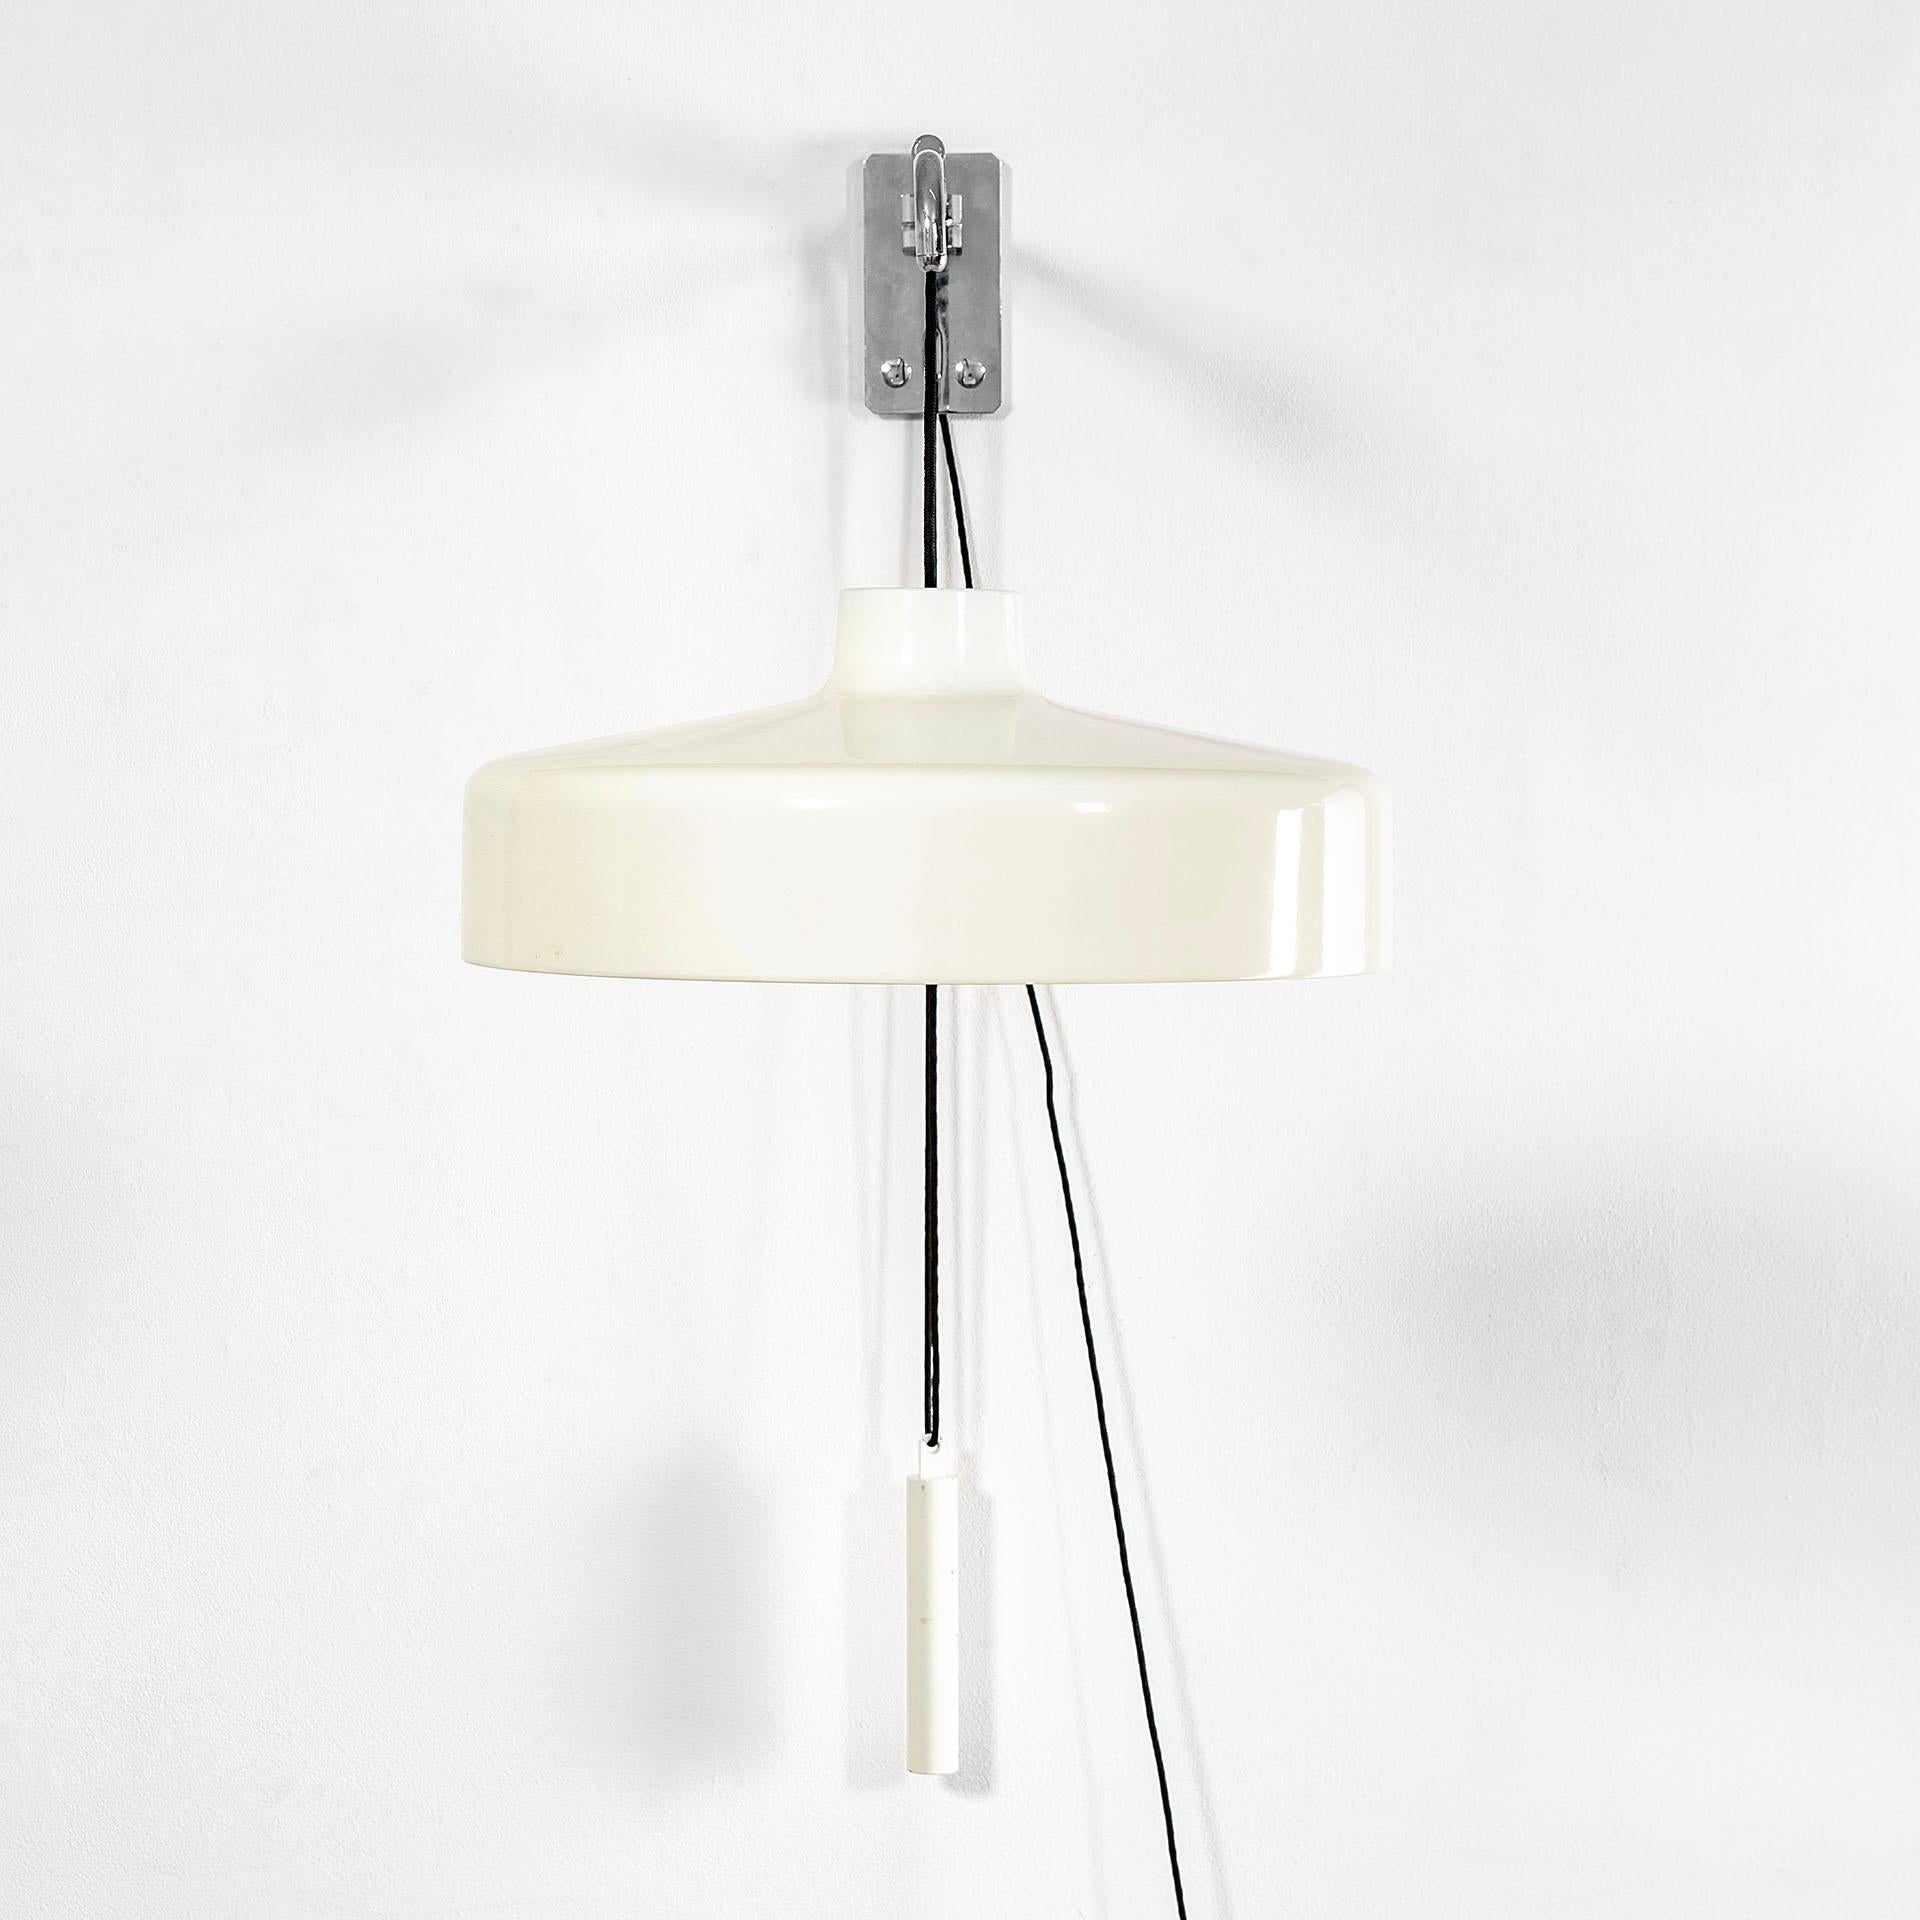 20th Century Gino Sarfatti Adjustable Wall Lamp Mod. 194 for Arteluce, 1950s In Good Condition For Sale In Turin, Turin